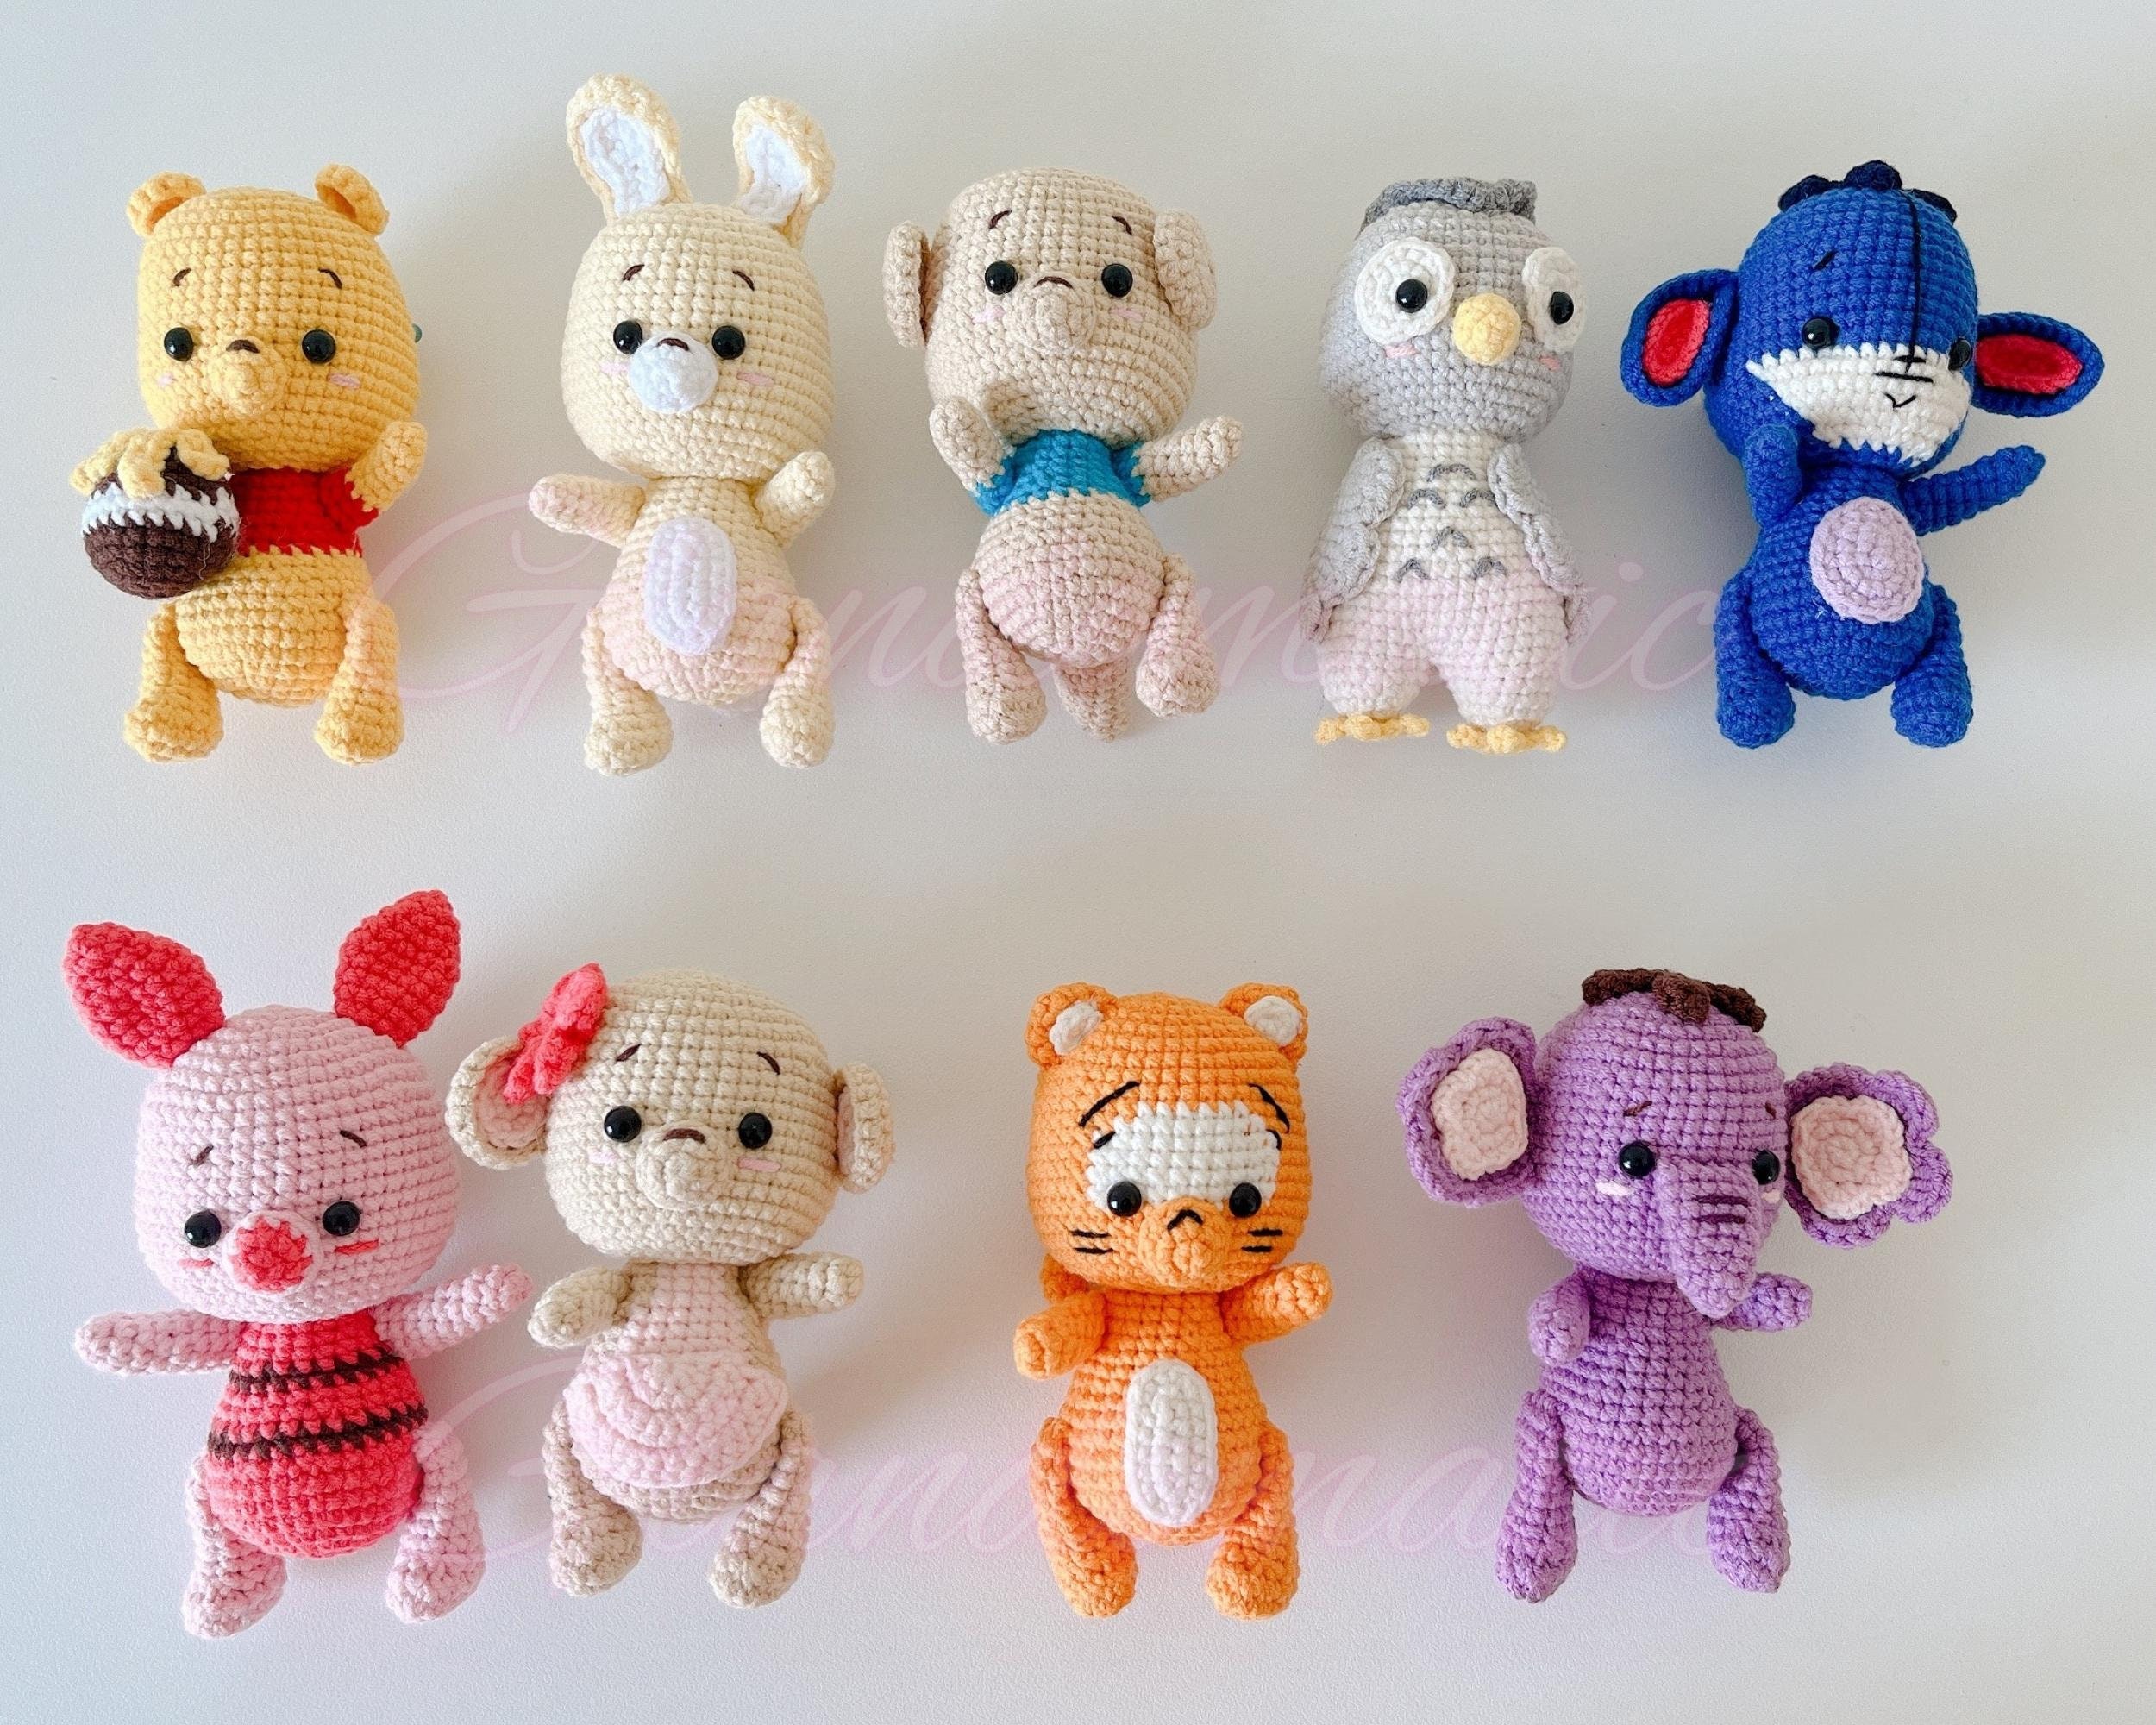 Crochet Winnie the Pooh and Friends Doll Baby Winnie Pooh - Etsy UK